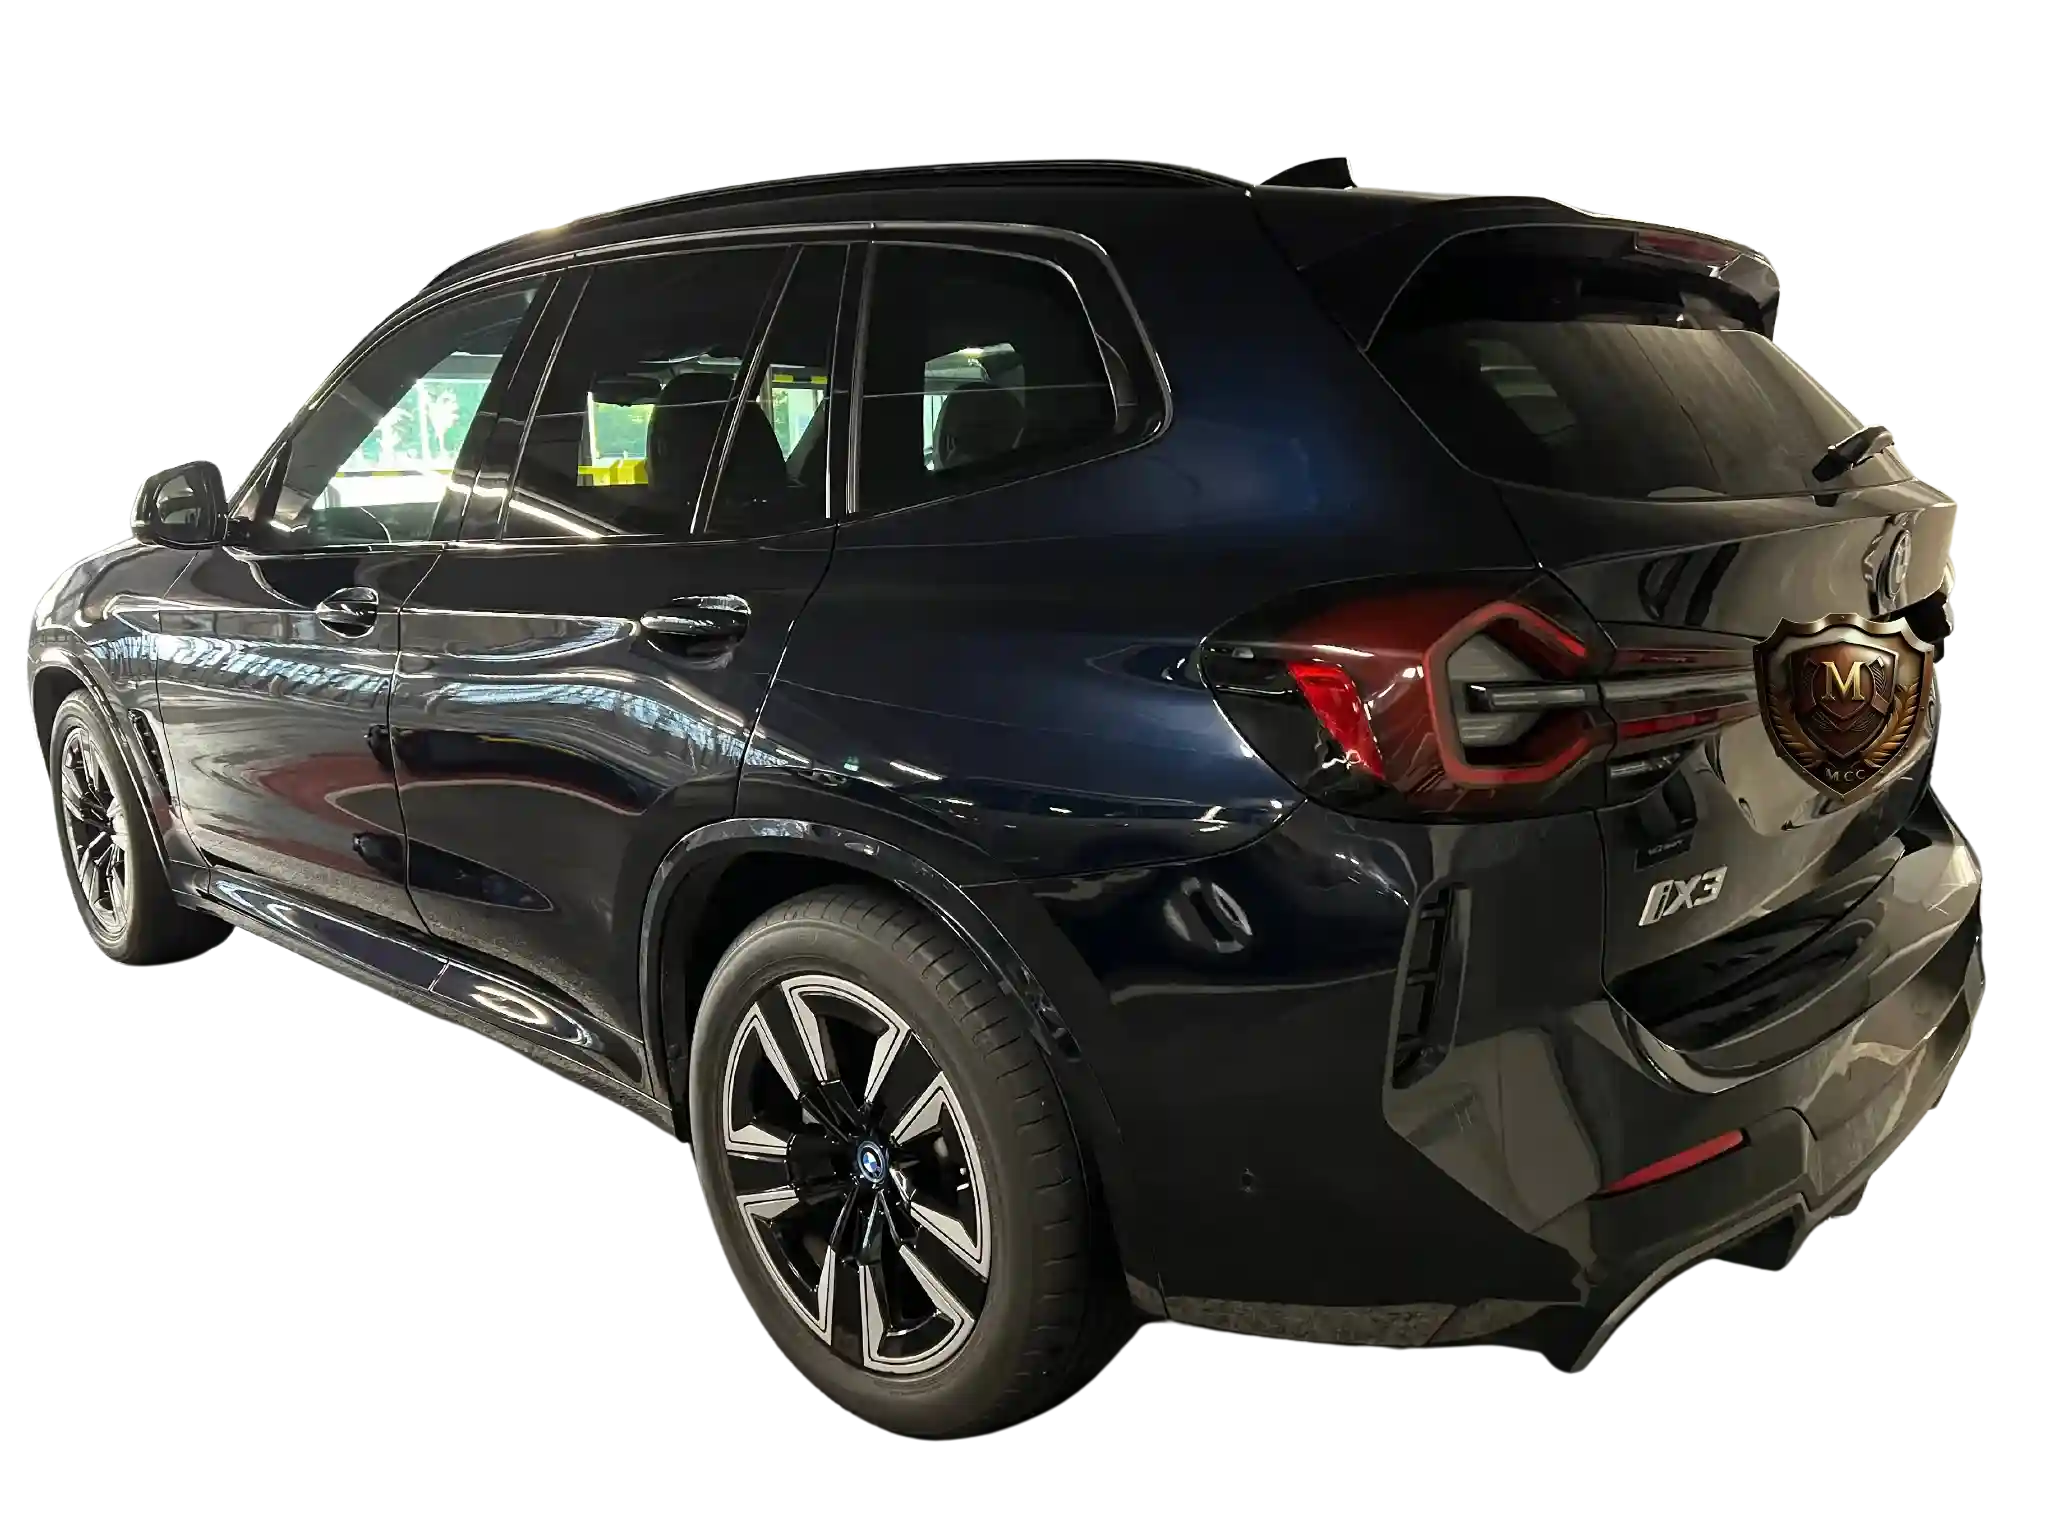 BMW iX3 electric SUV, gleaming after eco-conscious waterless valeting, ideal for corporate fleets.